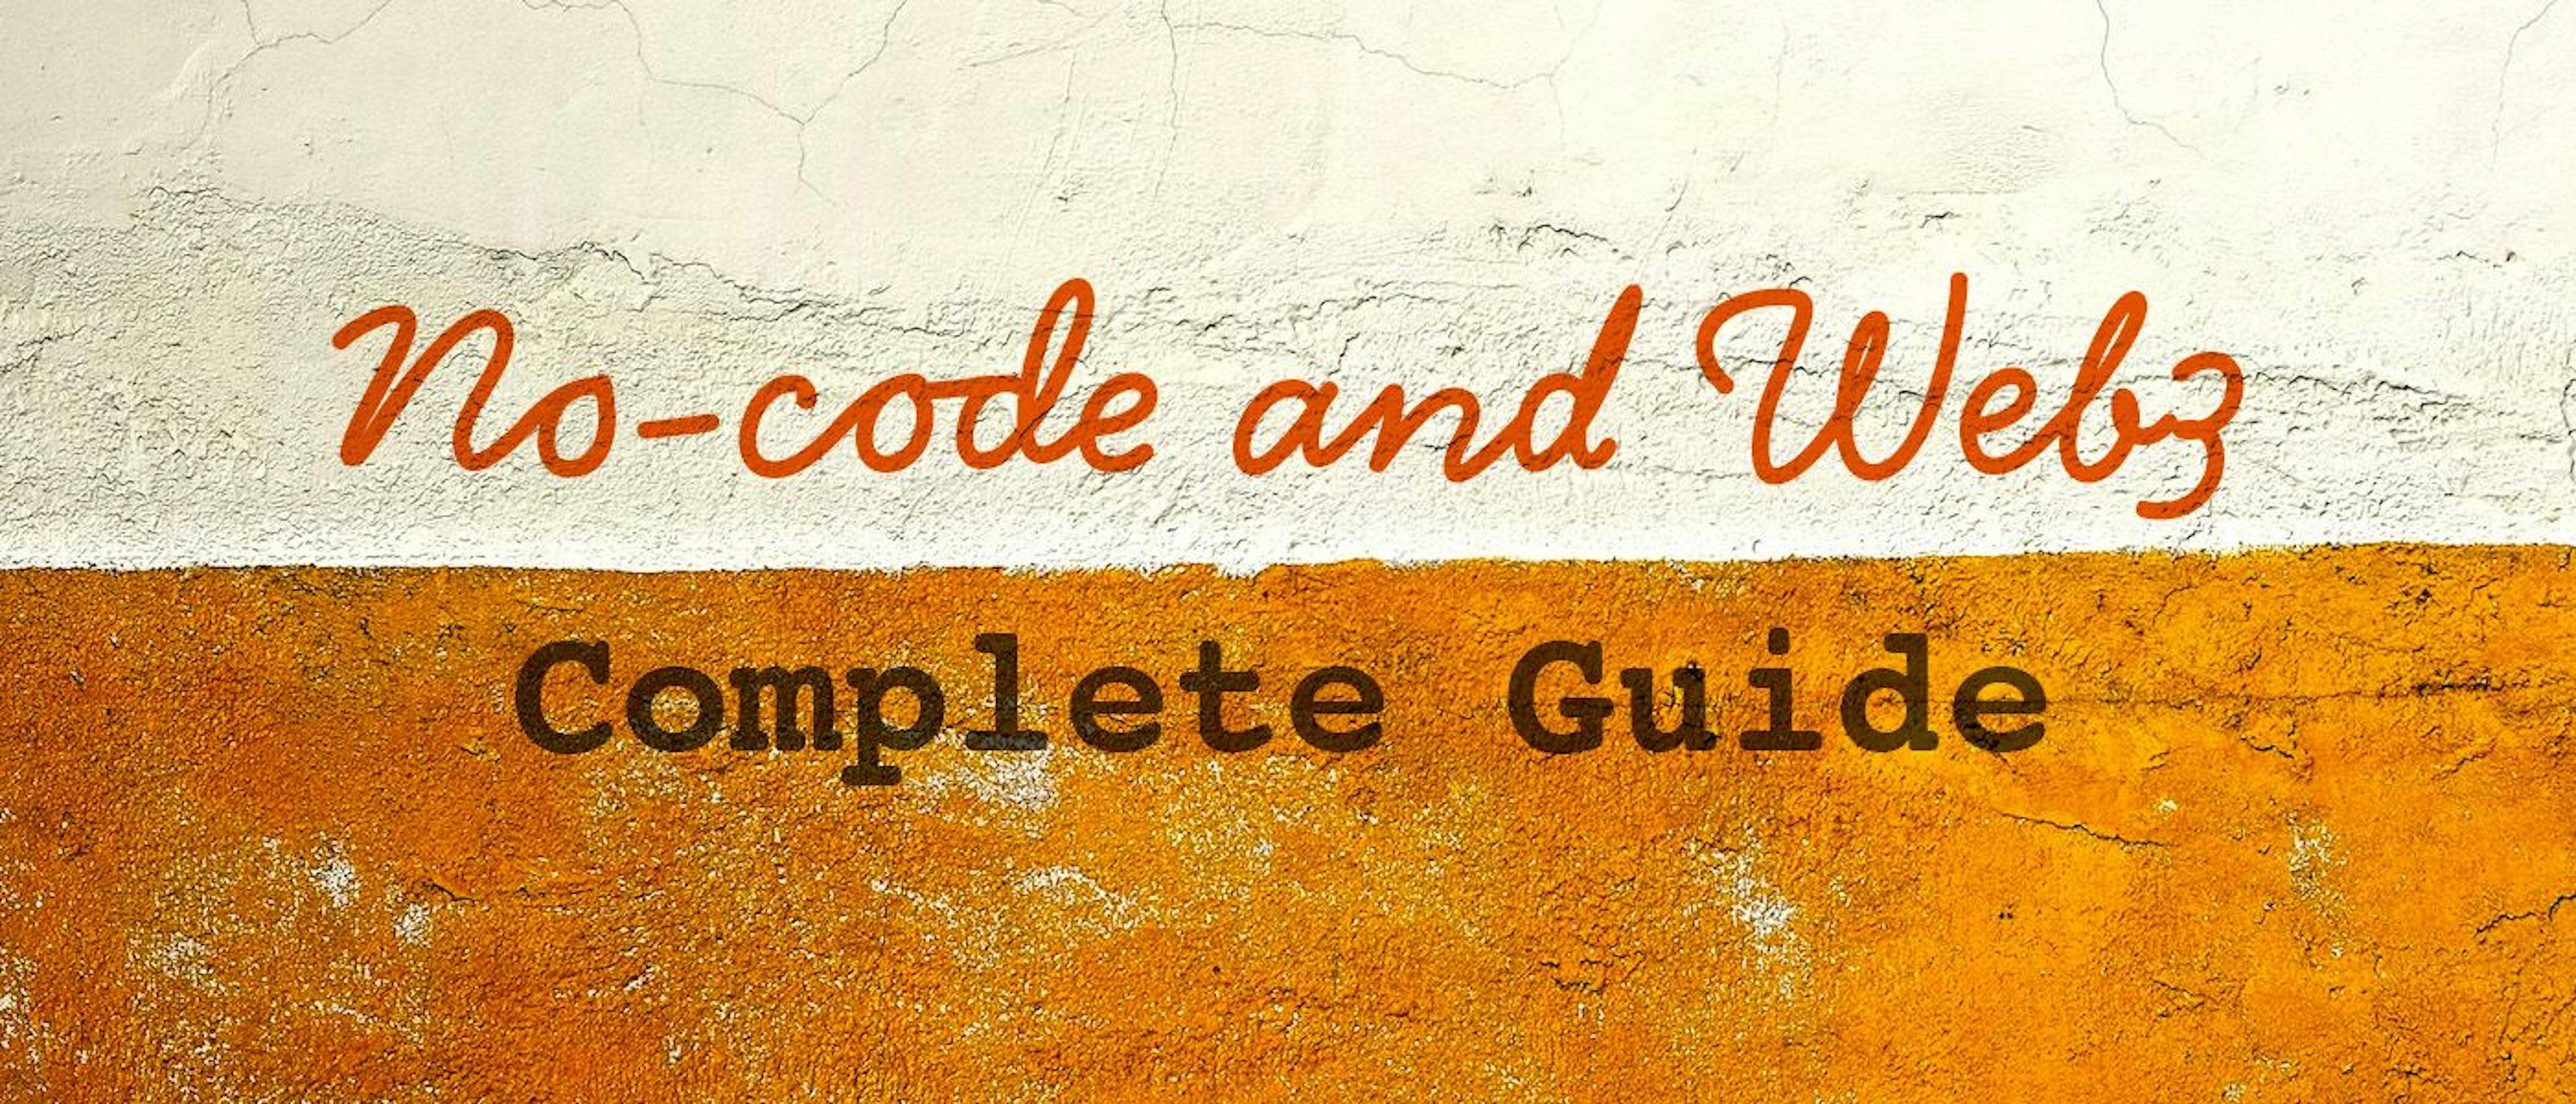 /a-complete-guide-to-no-code-and-web3 feature image